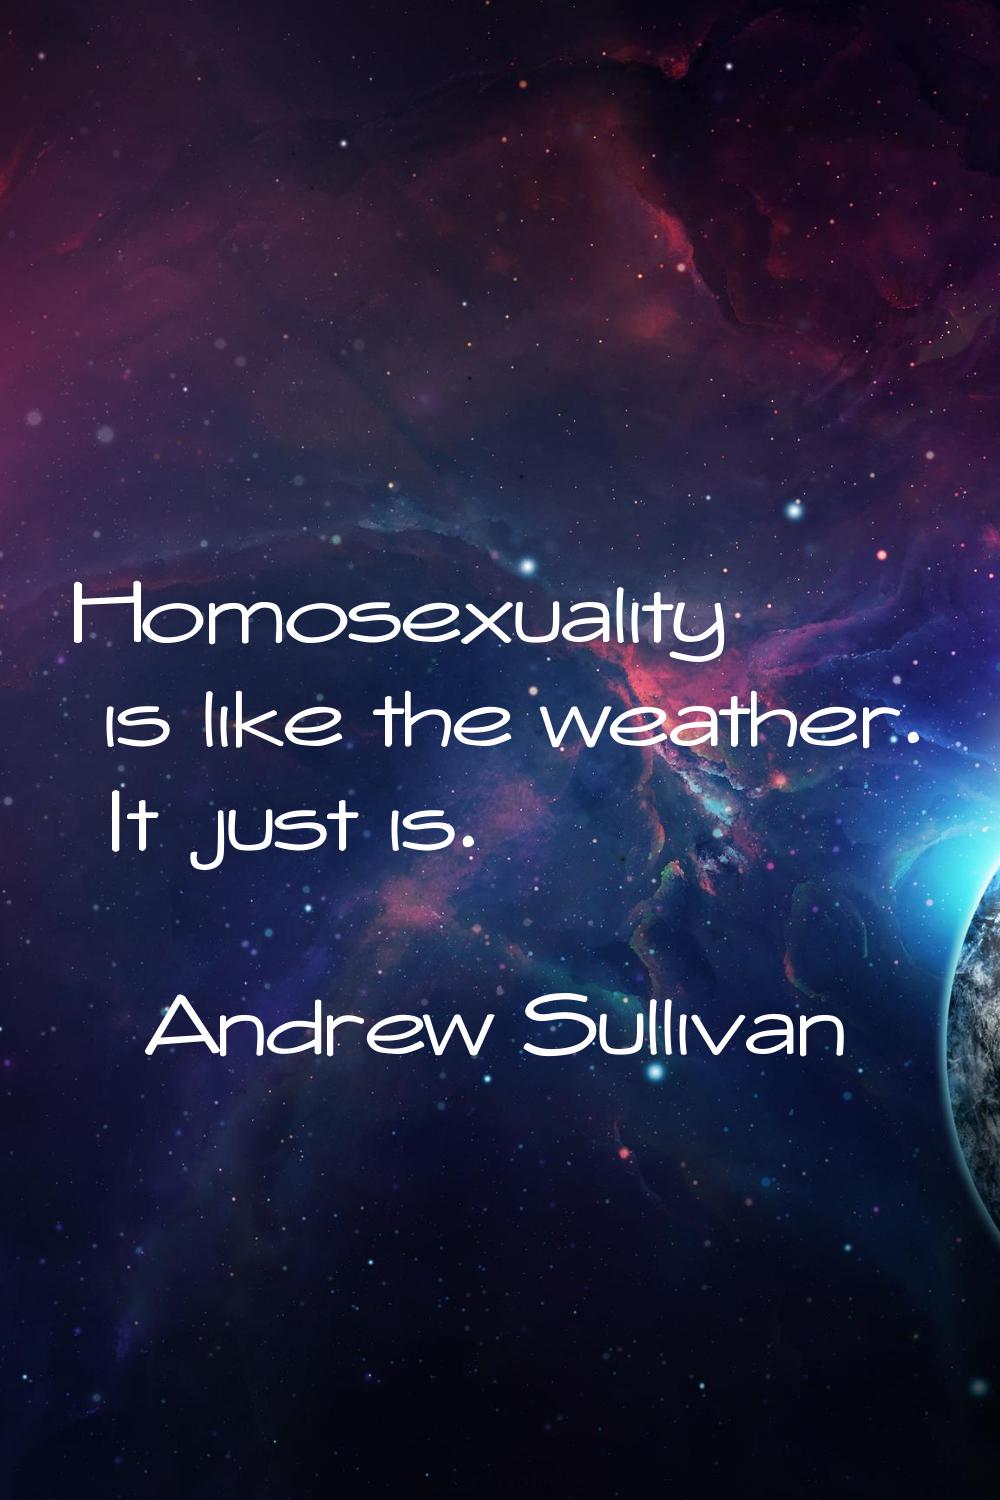 Homosexuality is like the weather. It just is.